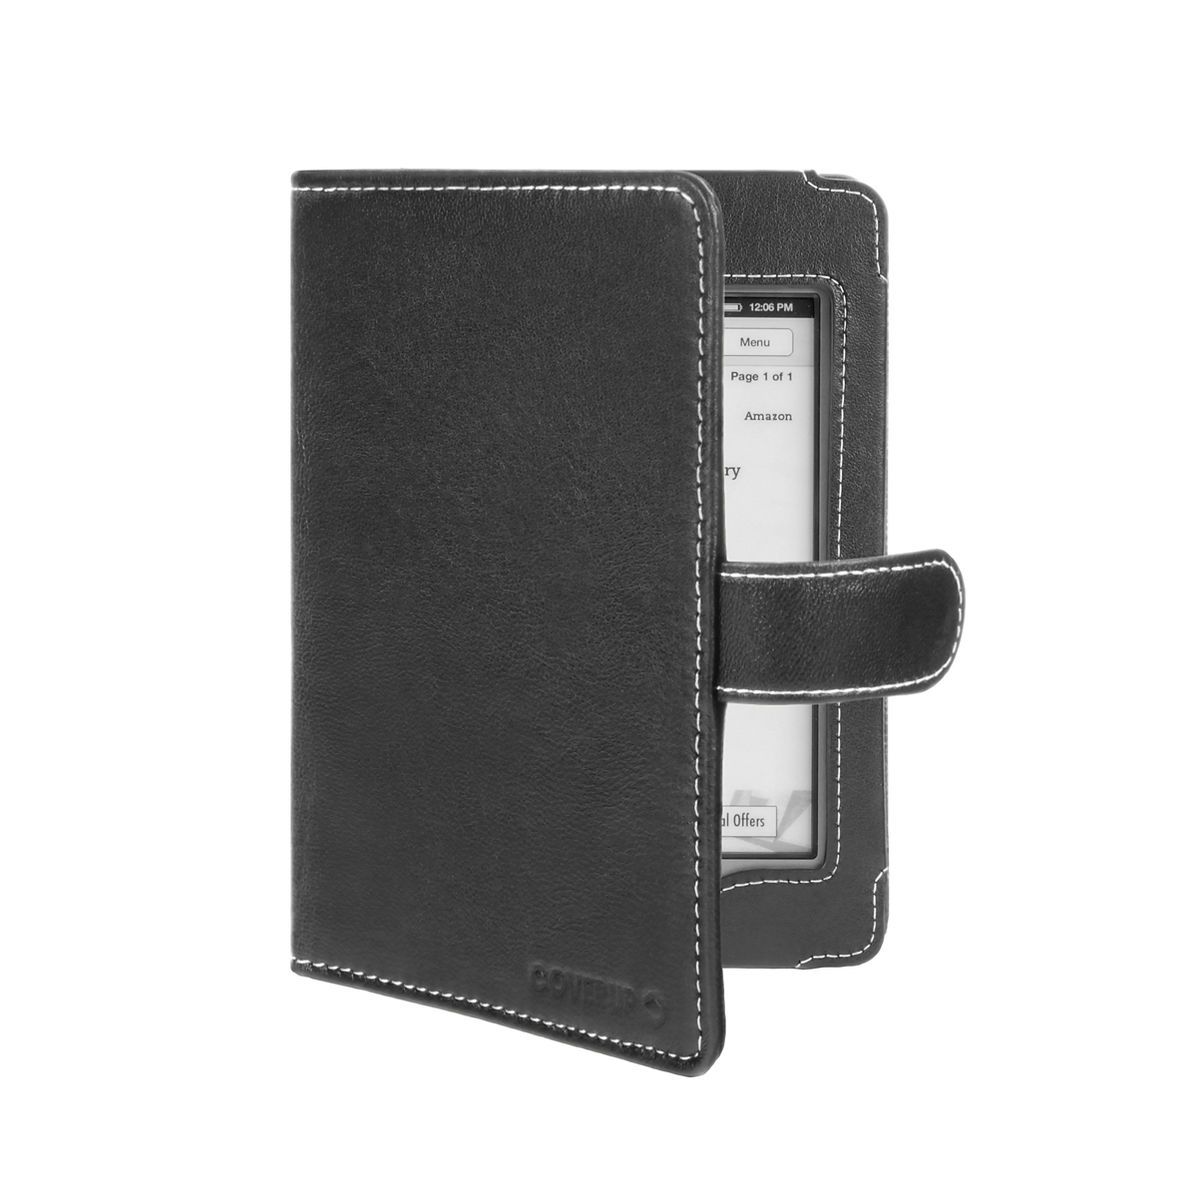  Kindle Touch Wi Fi 3G Black Nappa Leather Book Style Cover Case 